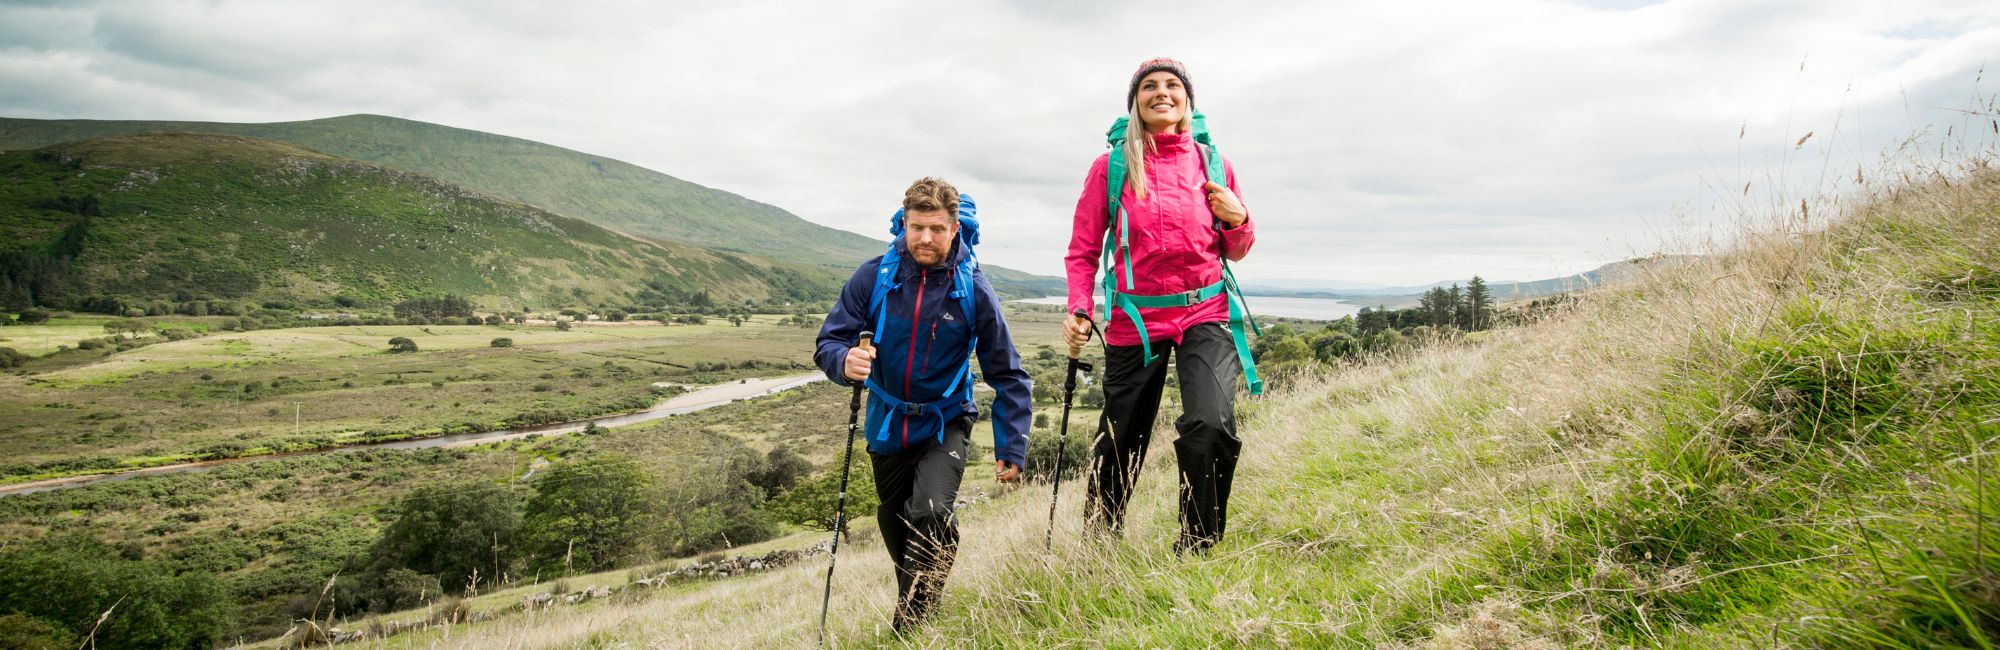 Hiking & Trekking Collection at Portwest - The Outdoor Shop